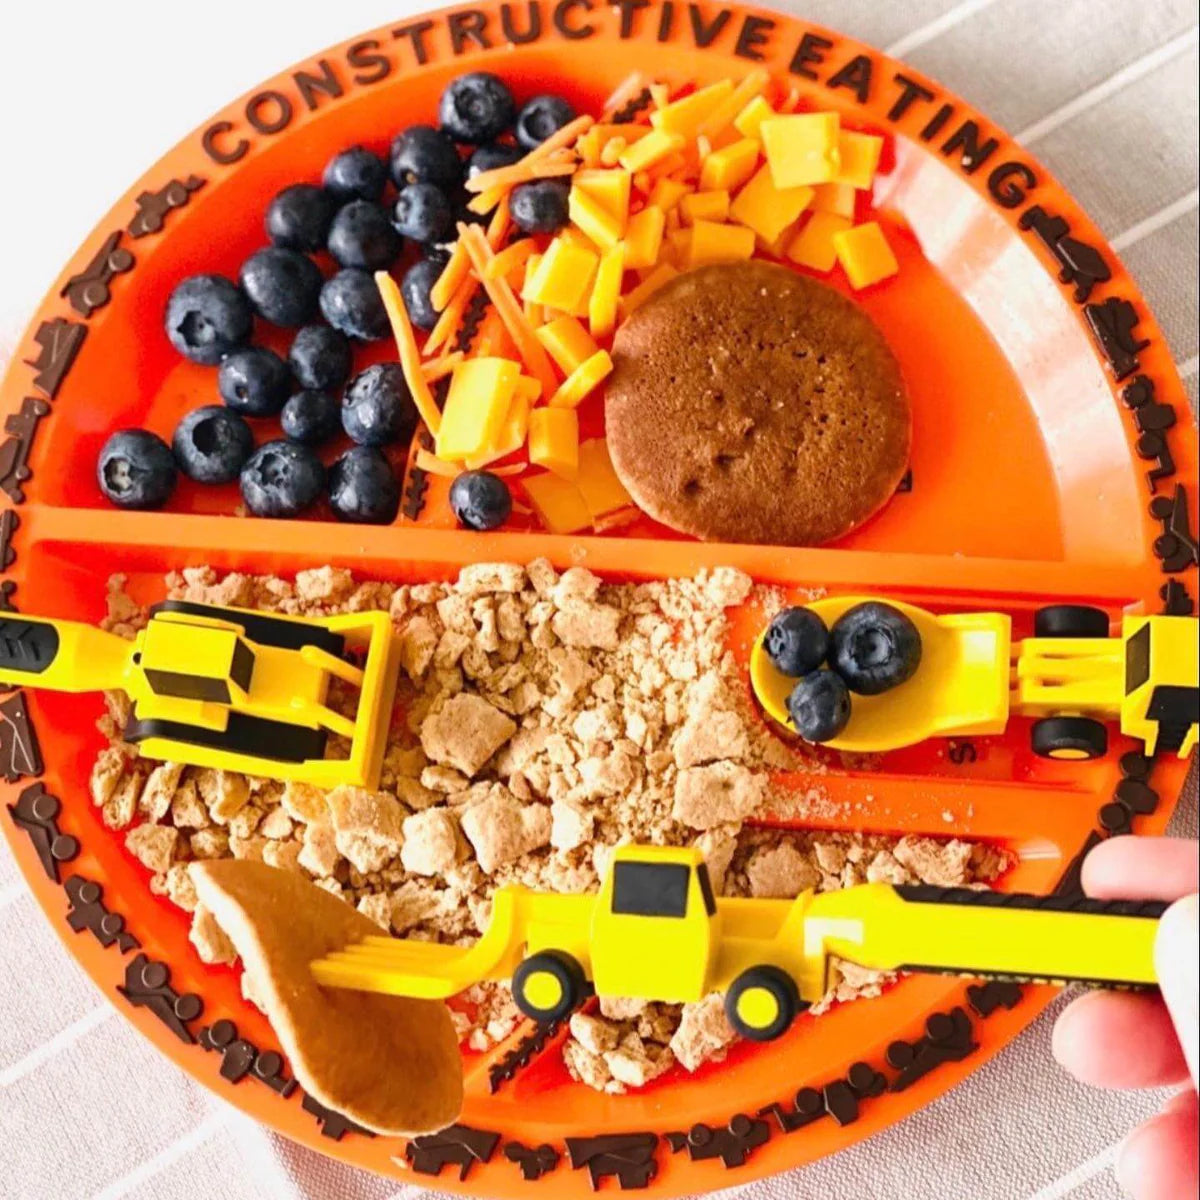 Construction_plate_with_food_and_cutlery_on_top